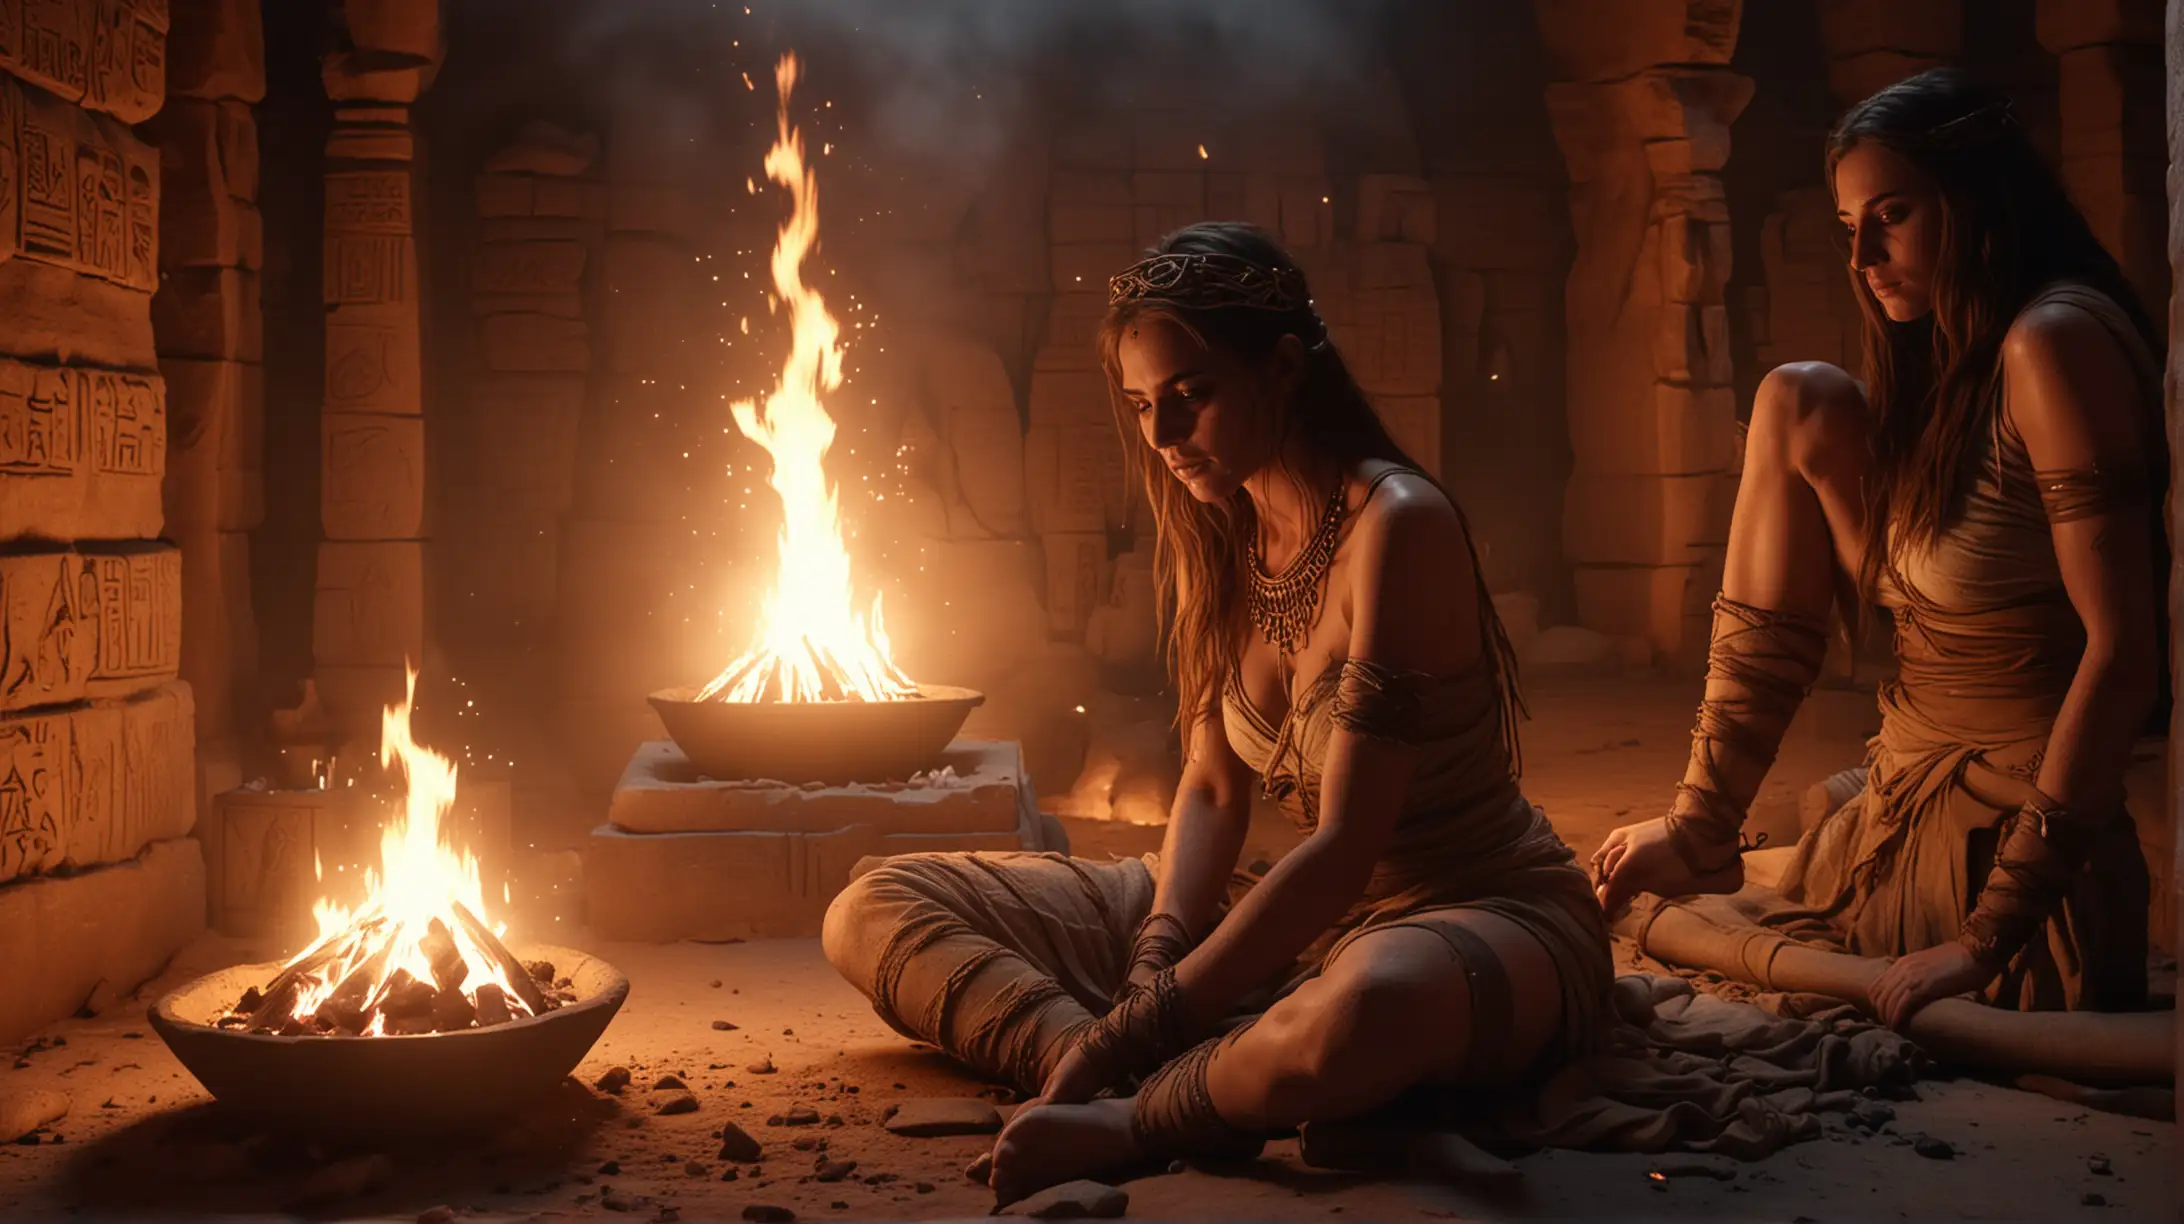 (beneath young beautiful girl: 1.3) A mummy preparation of a young beautiful alive girl in a chamber of a creepy pyramid illuminated by fire bowls, full shot, super realistic, extremely hyper detailed, cinematic 8k.